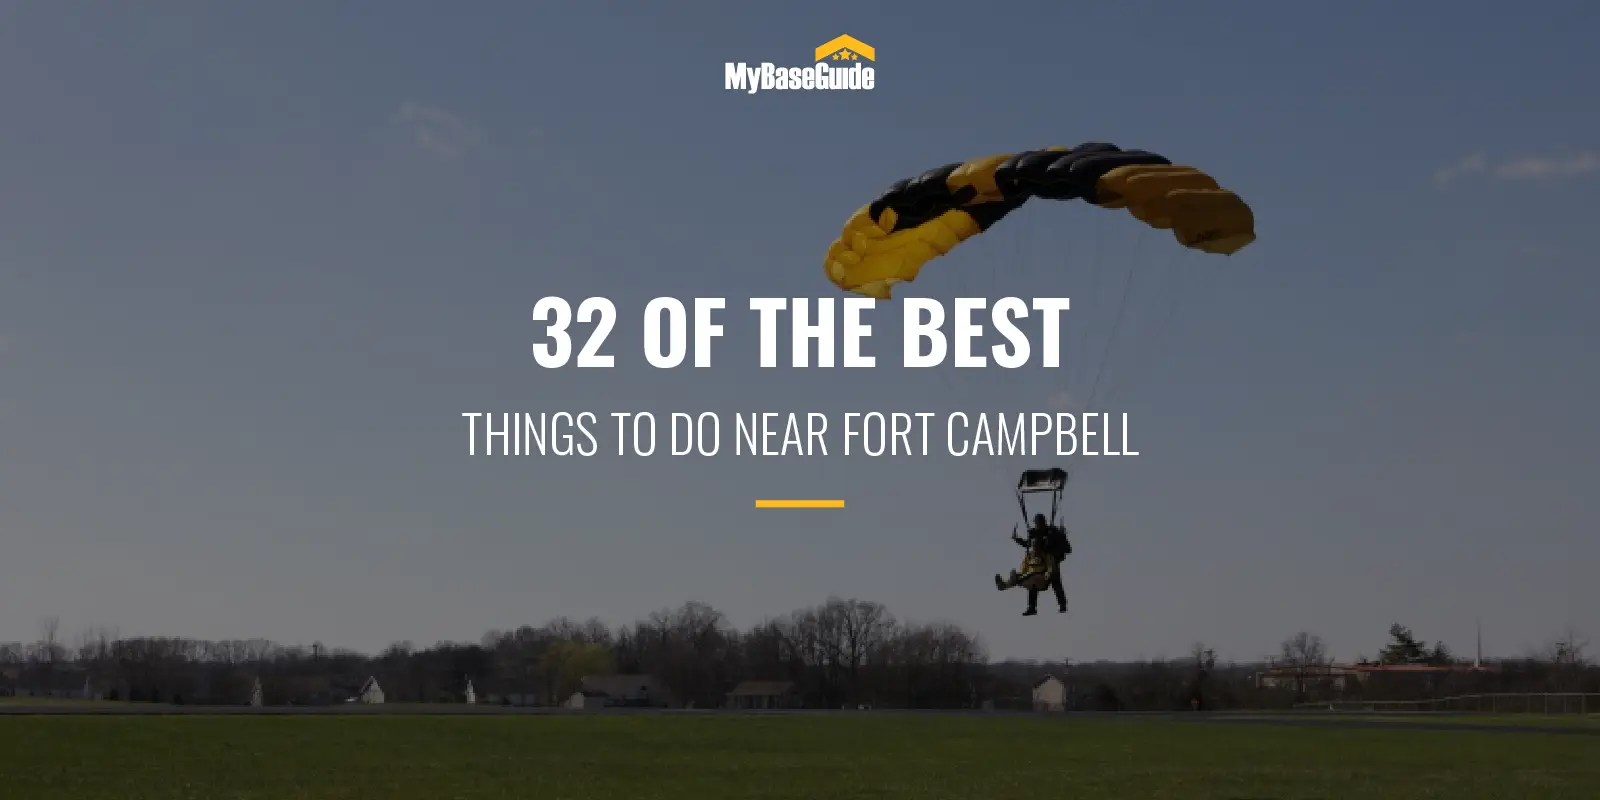 fort campbell tickets and tours